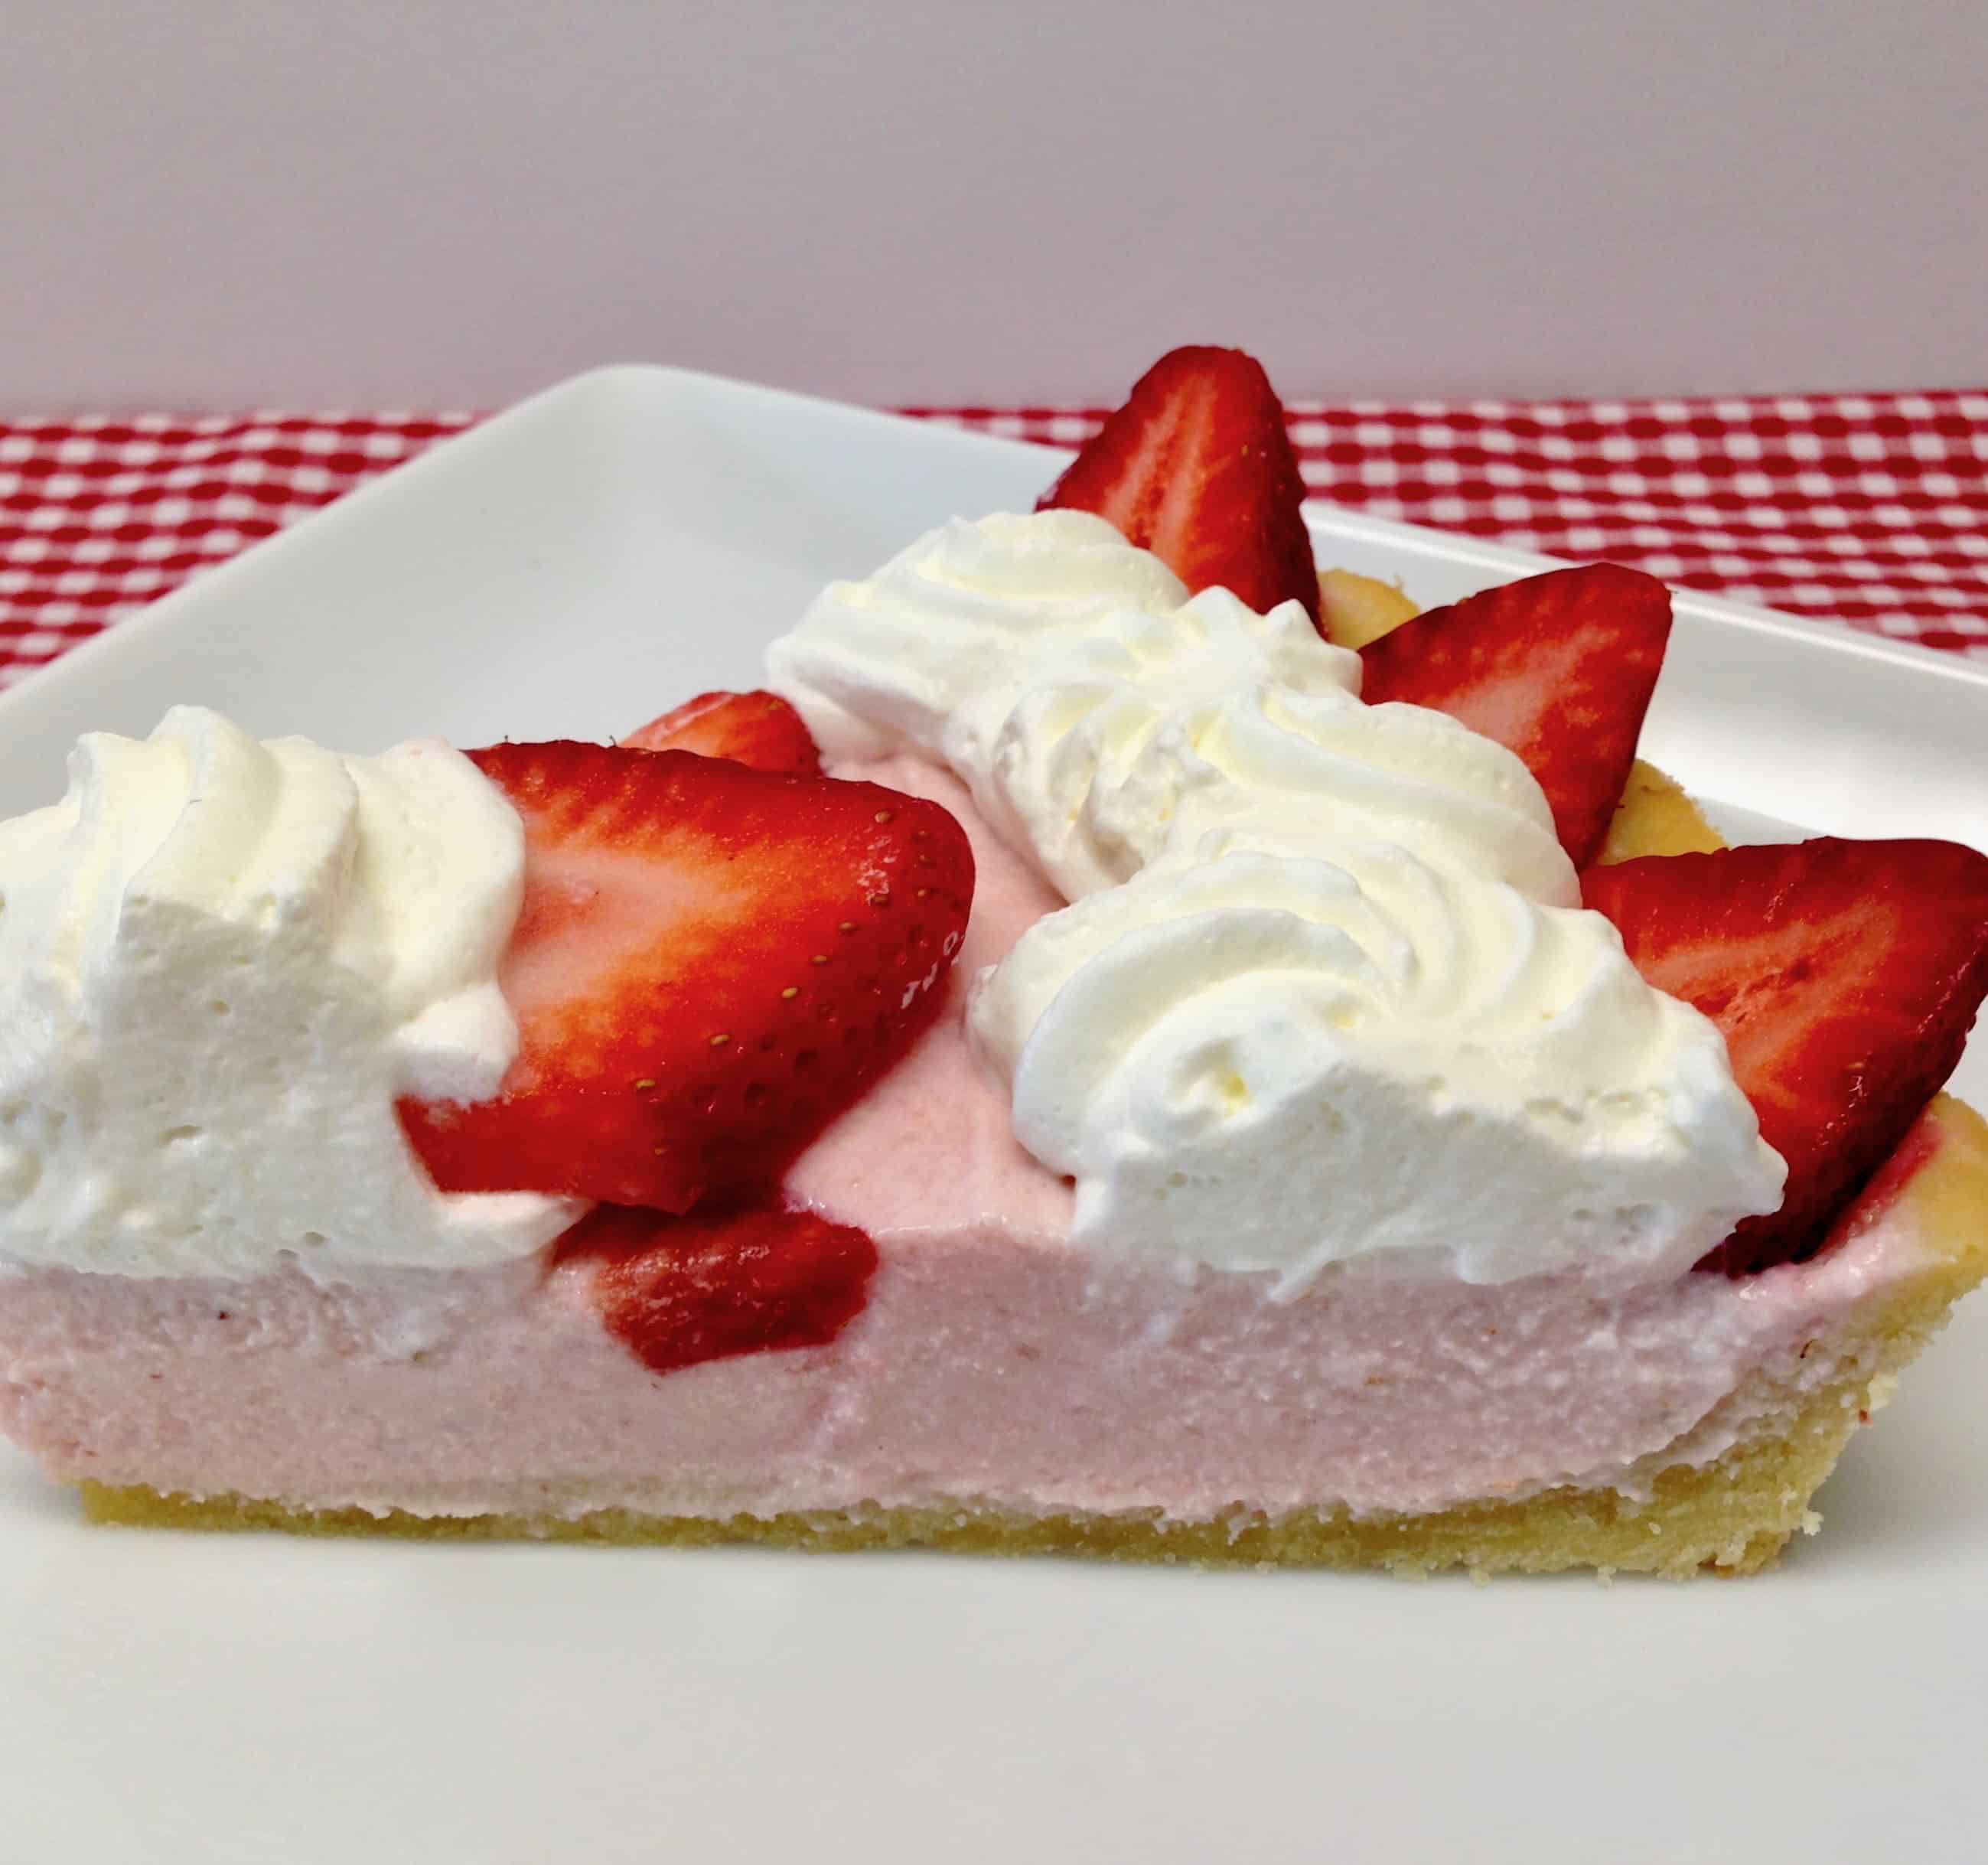 slice of strawberry tart with whip cream and slices of strawberries on top